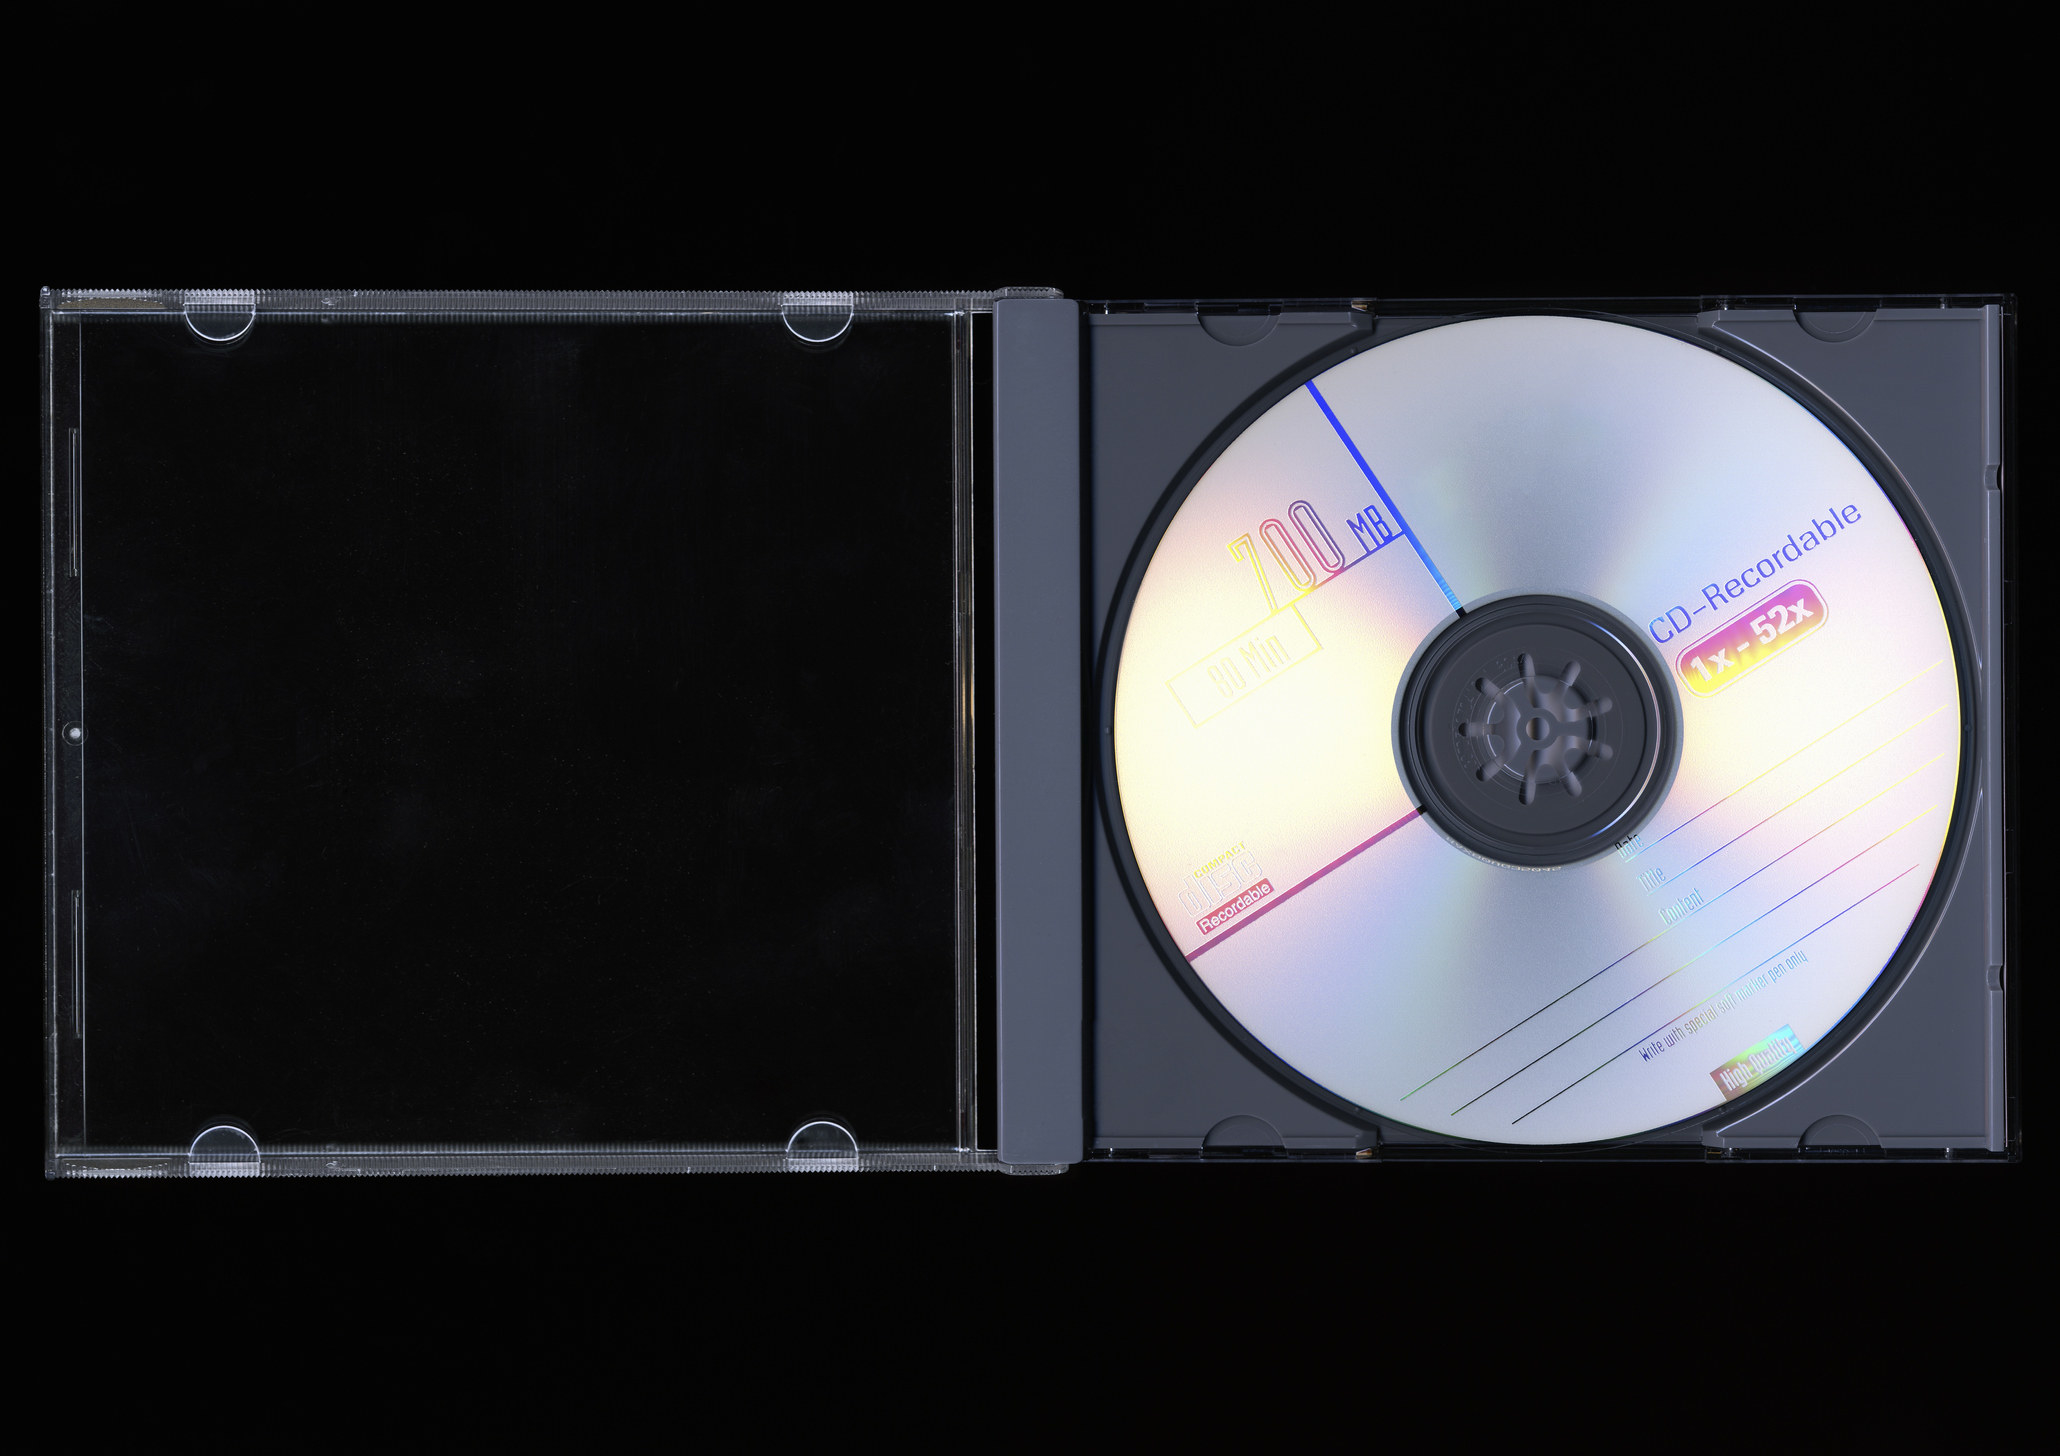 A blank CD in an open jewel box against a black background